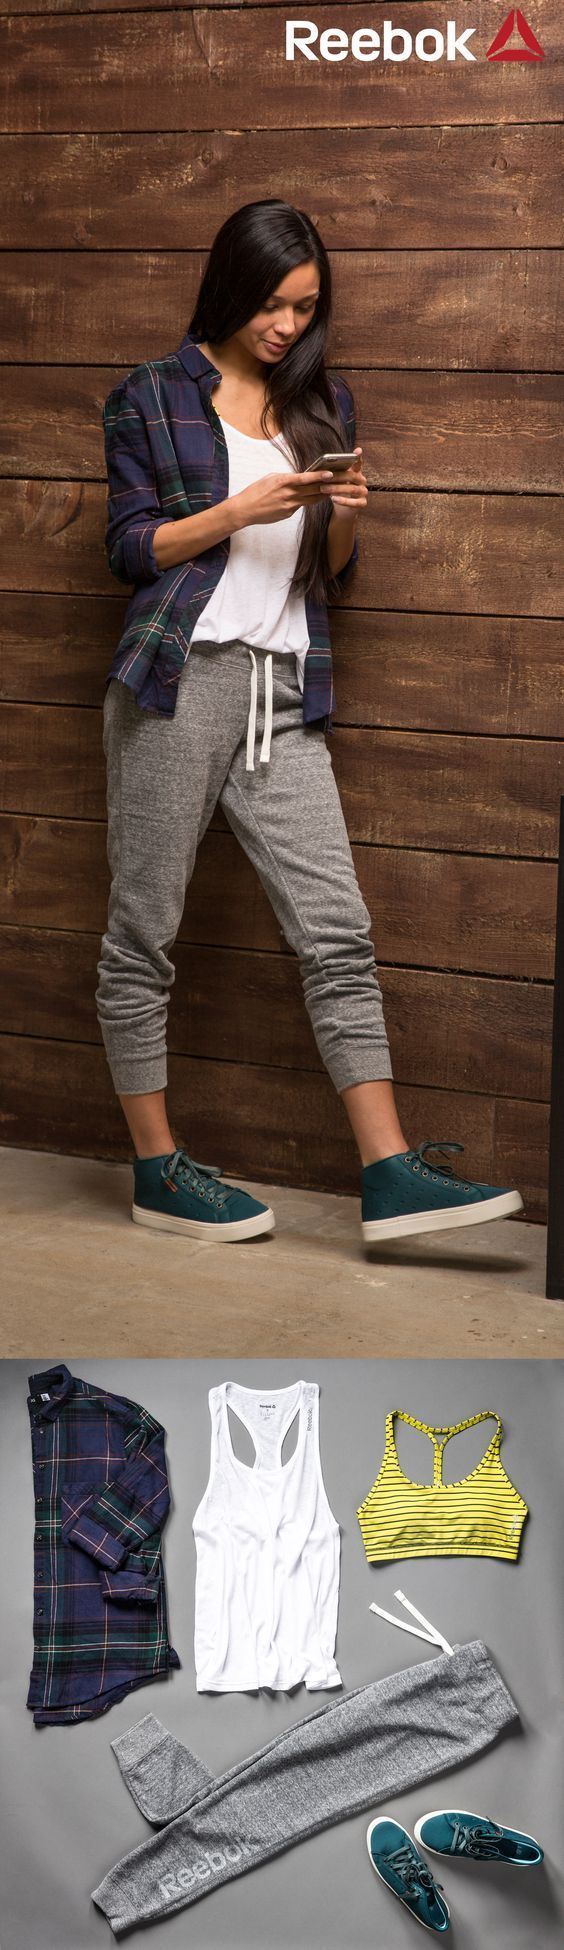 7 cool school outfits with sweatpants